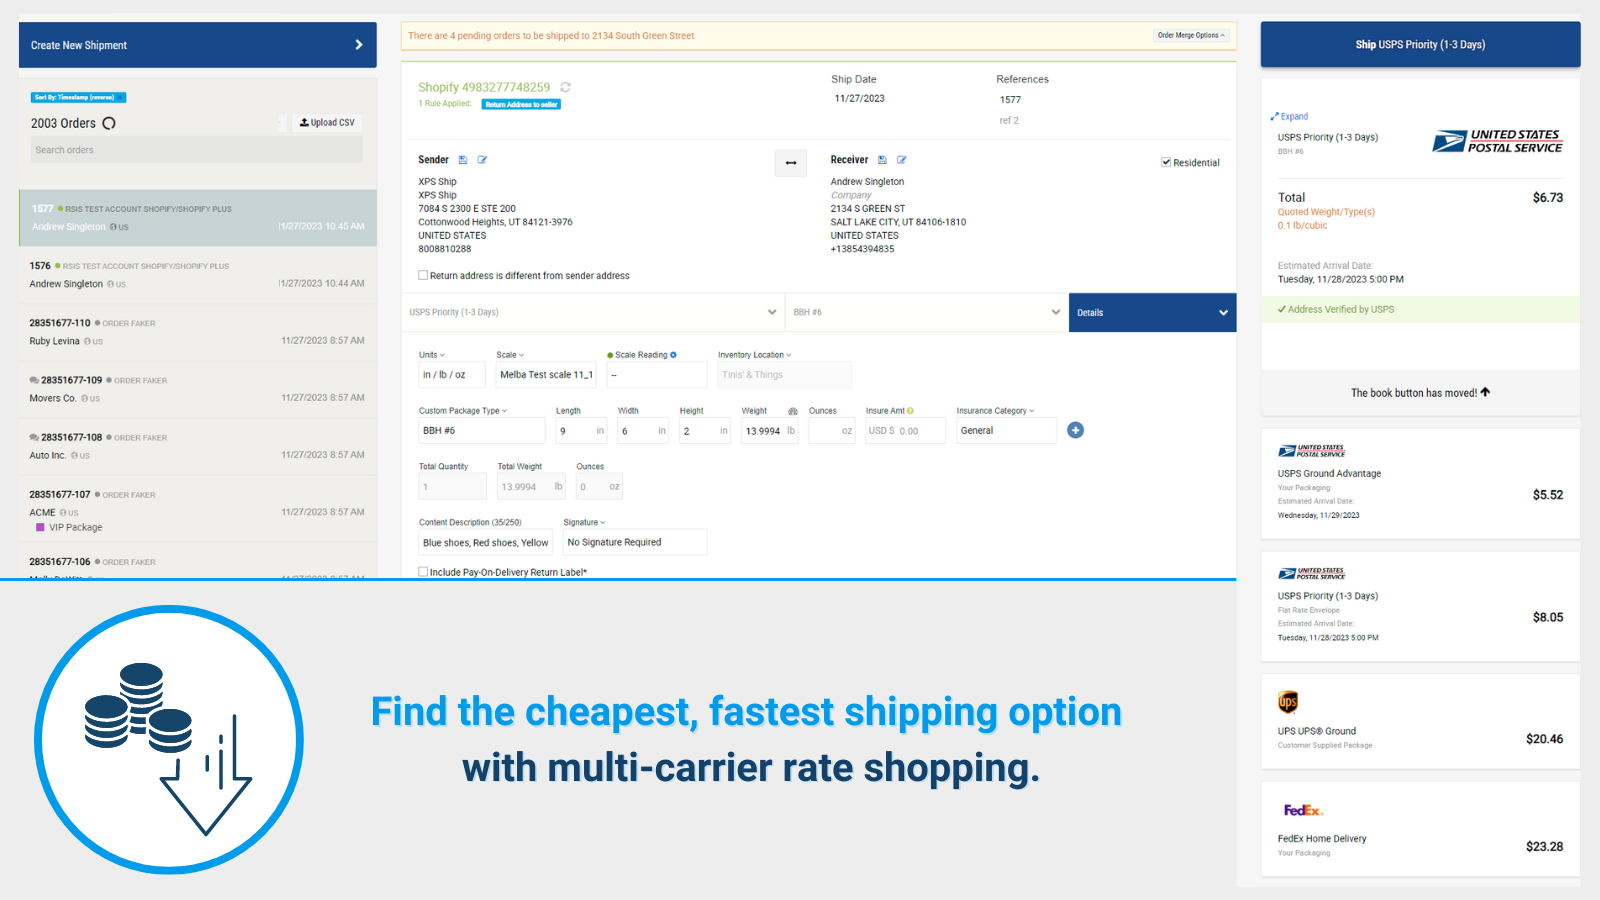 Multi-carrier rate shopping